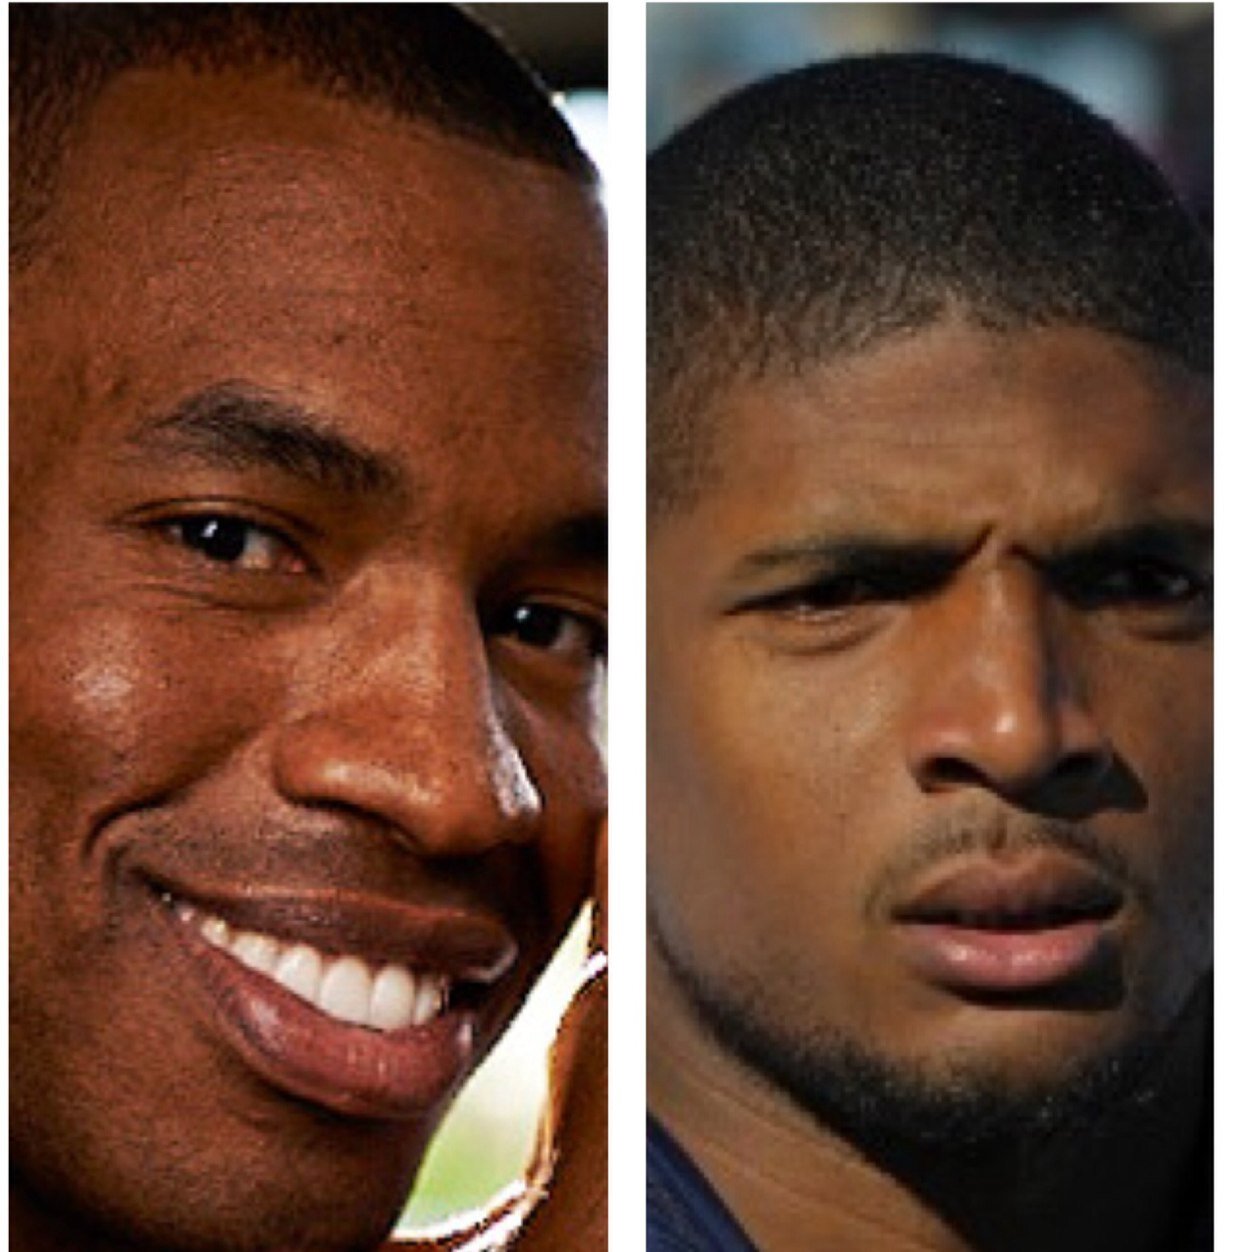 Official TV show of Michael Sam and Jason Collins. Shows air daily from 5am to 11am on the GayWayTV Network. #GayRights